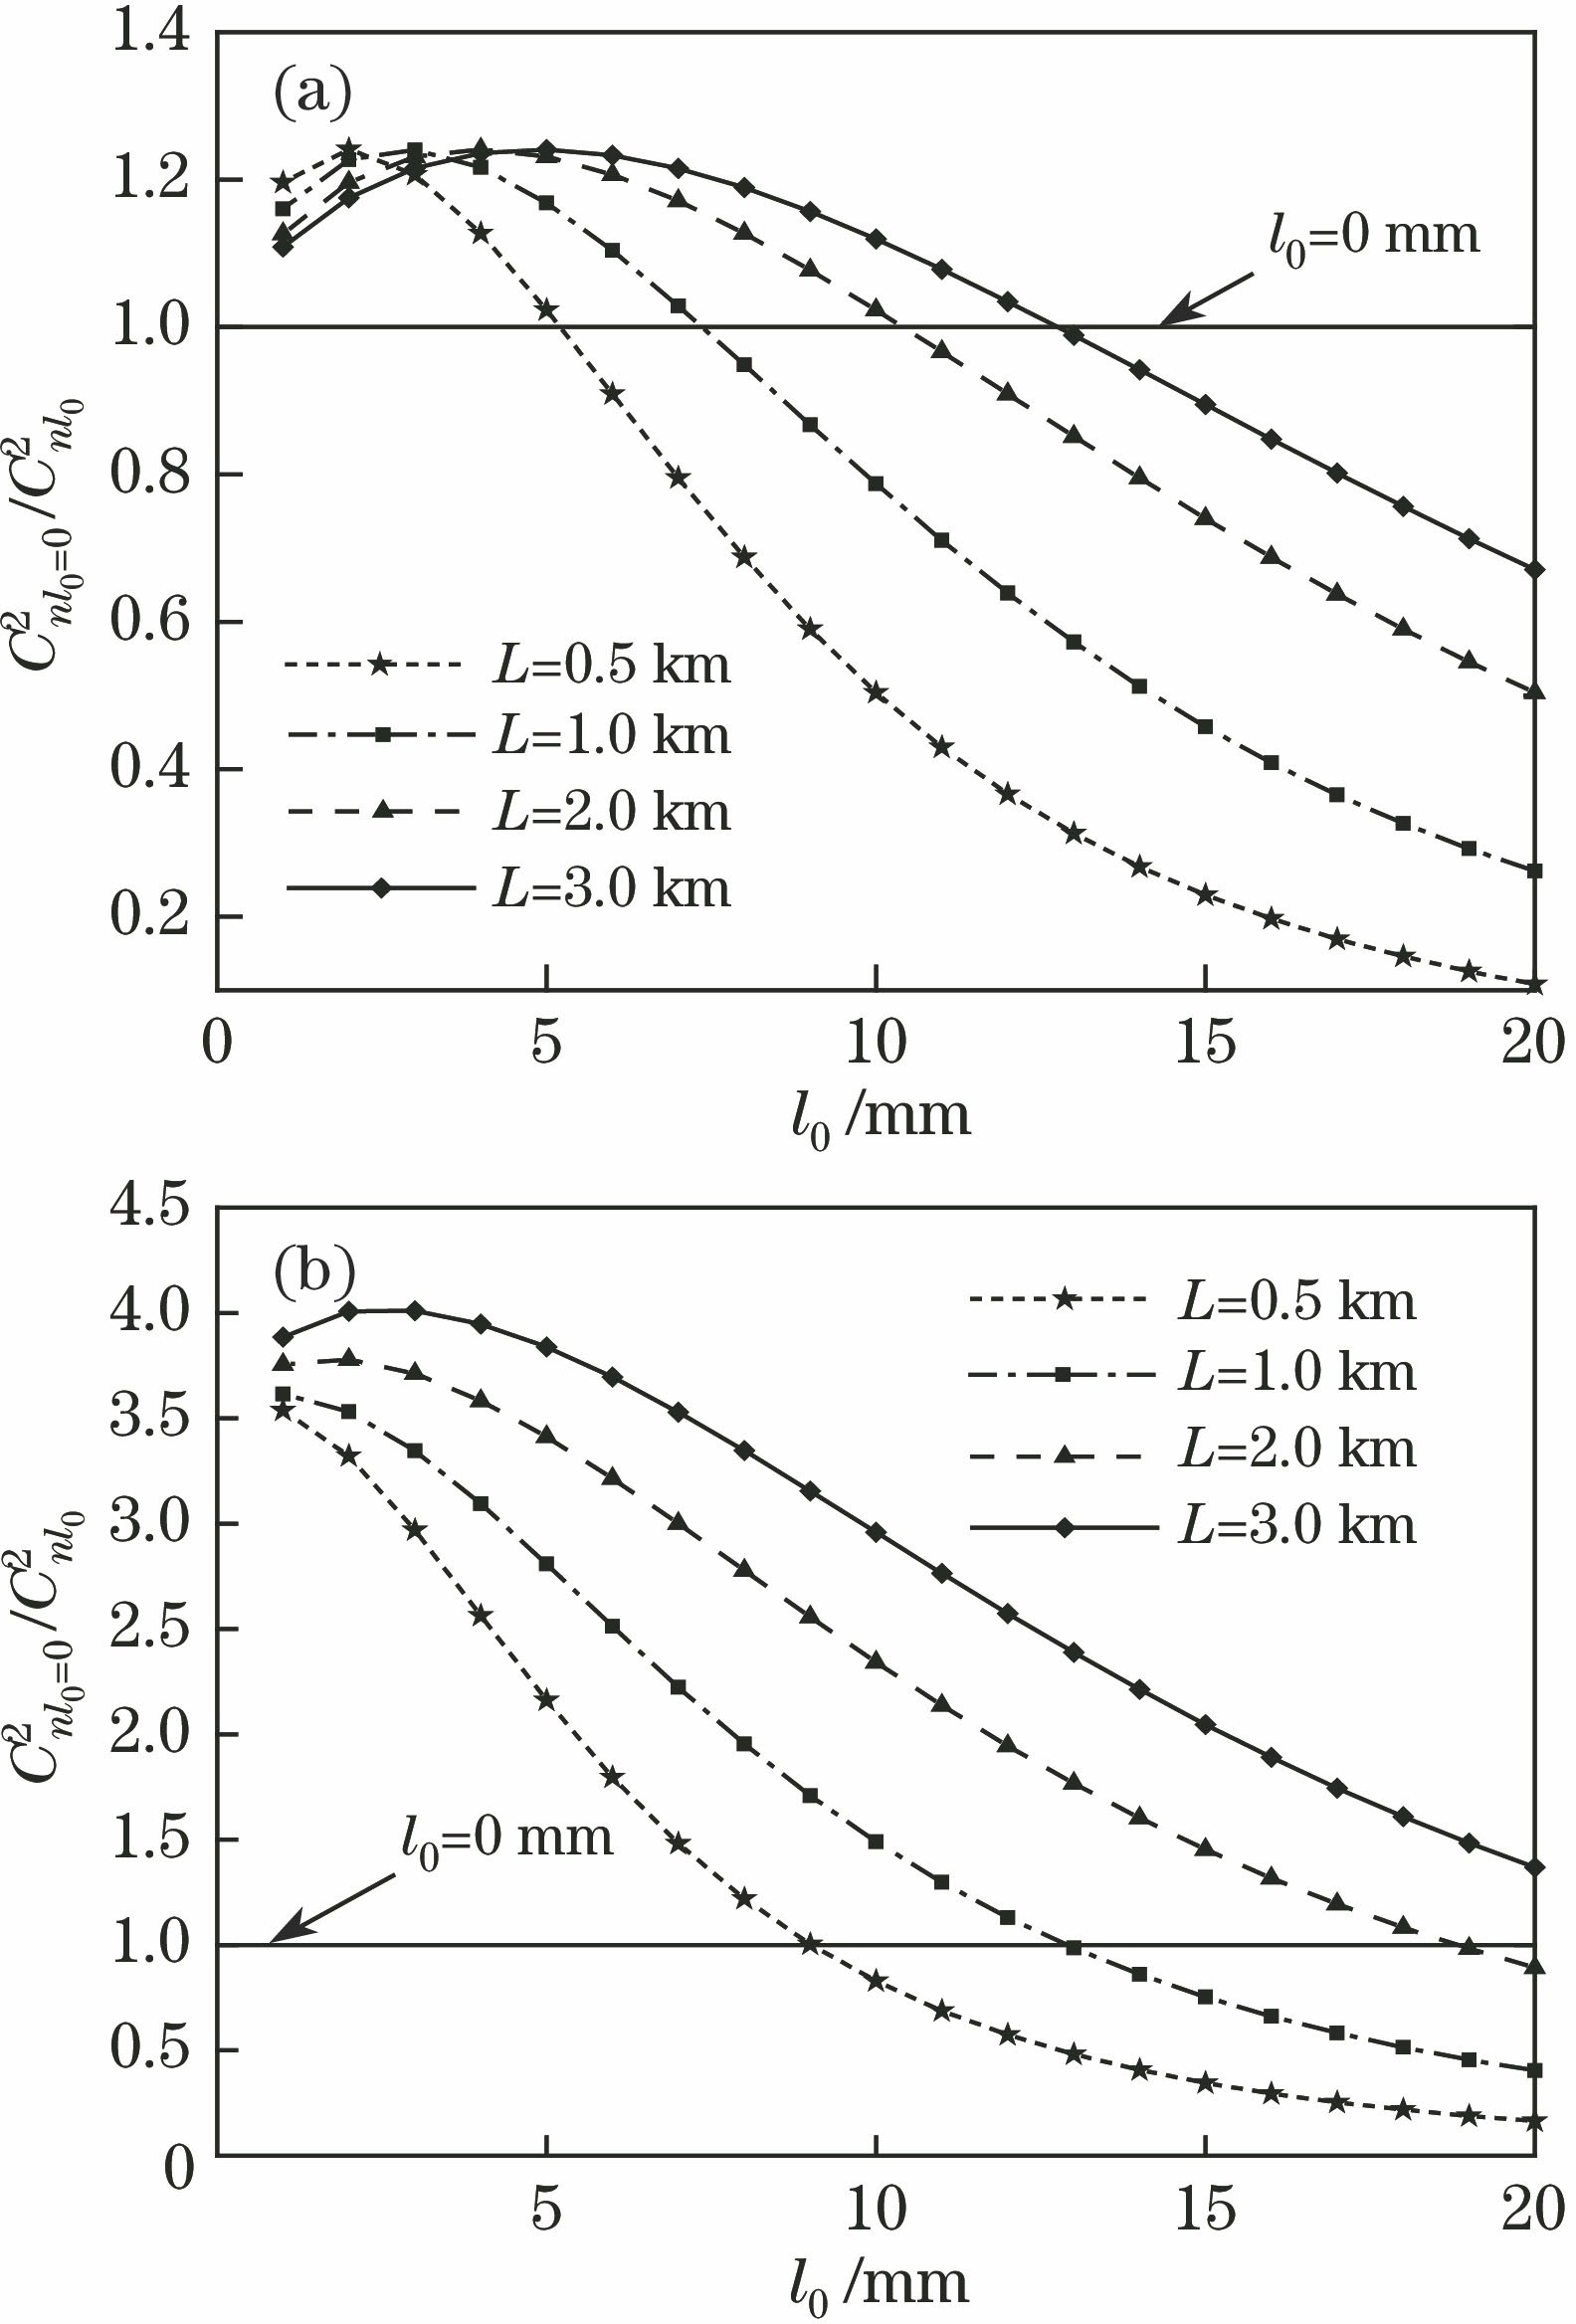 Influences of inner scale and length on Cn2 using two atmospheric turbulence spectrum models. (a) Modified Hill spectrum; (b) Rytov improved model